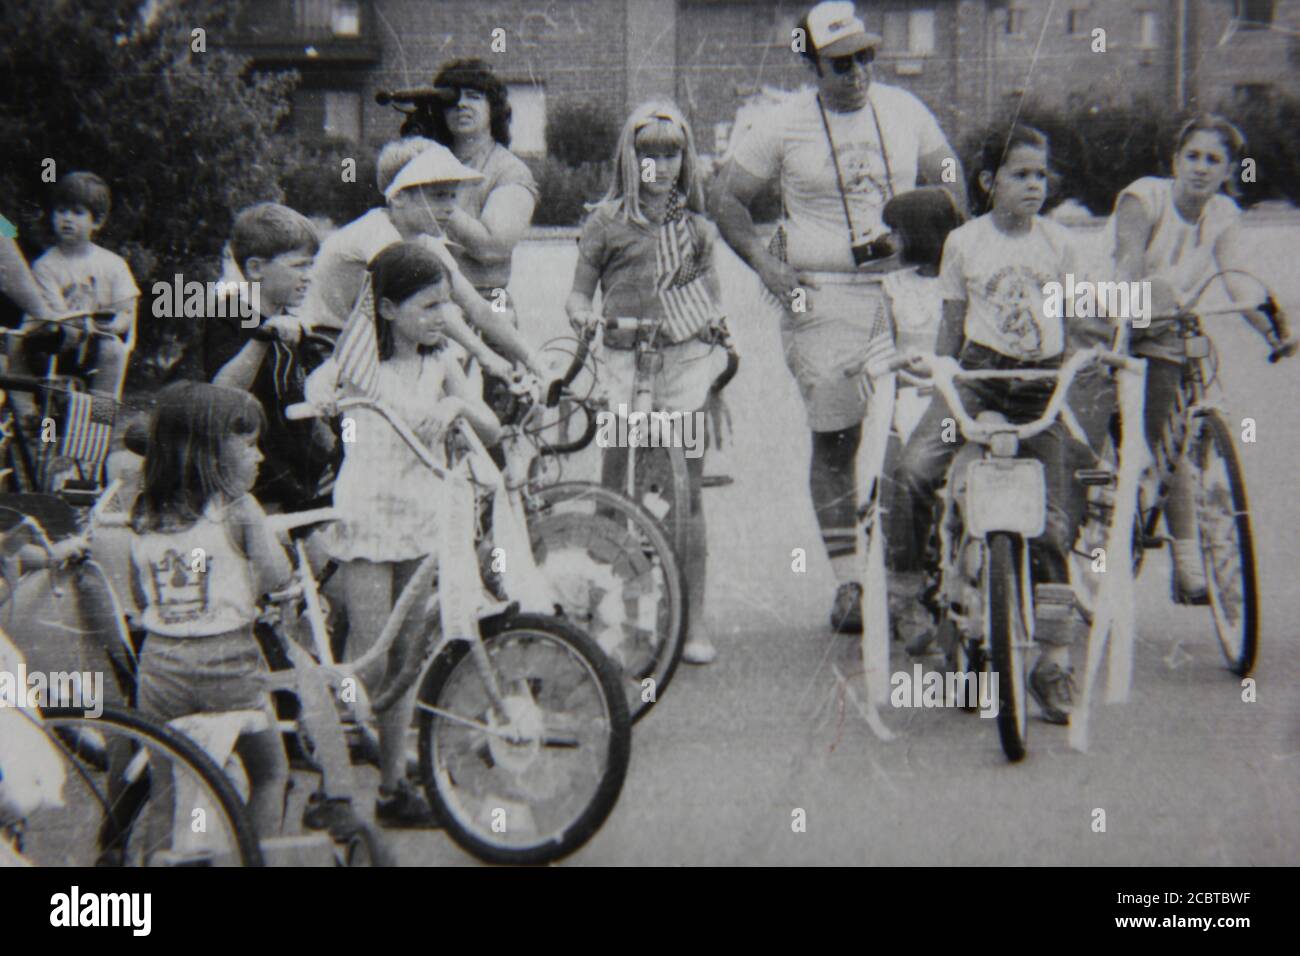 Fine 1970s vintage black and white photography of kids on bikes at the  local neighborhood street fair Stock Photo - Alamy